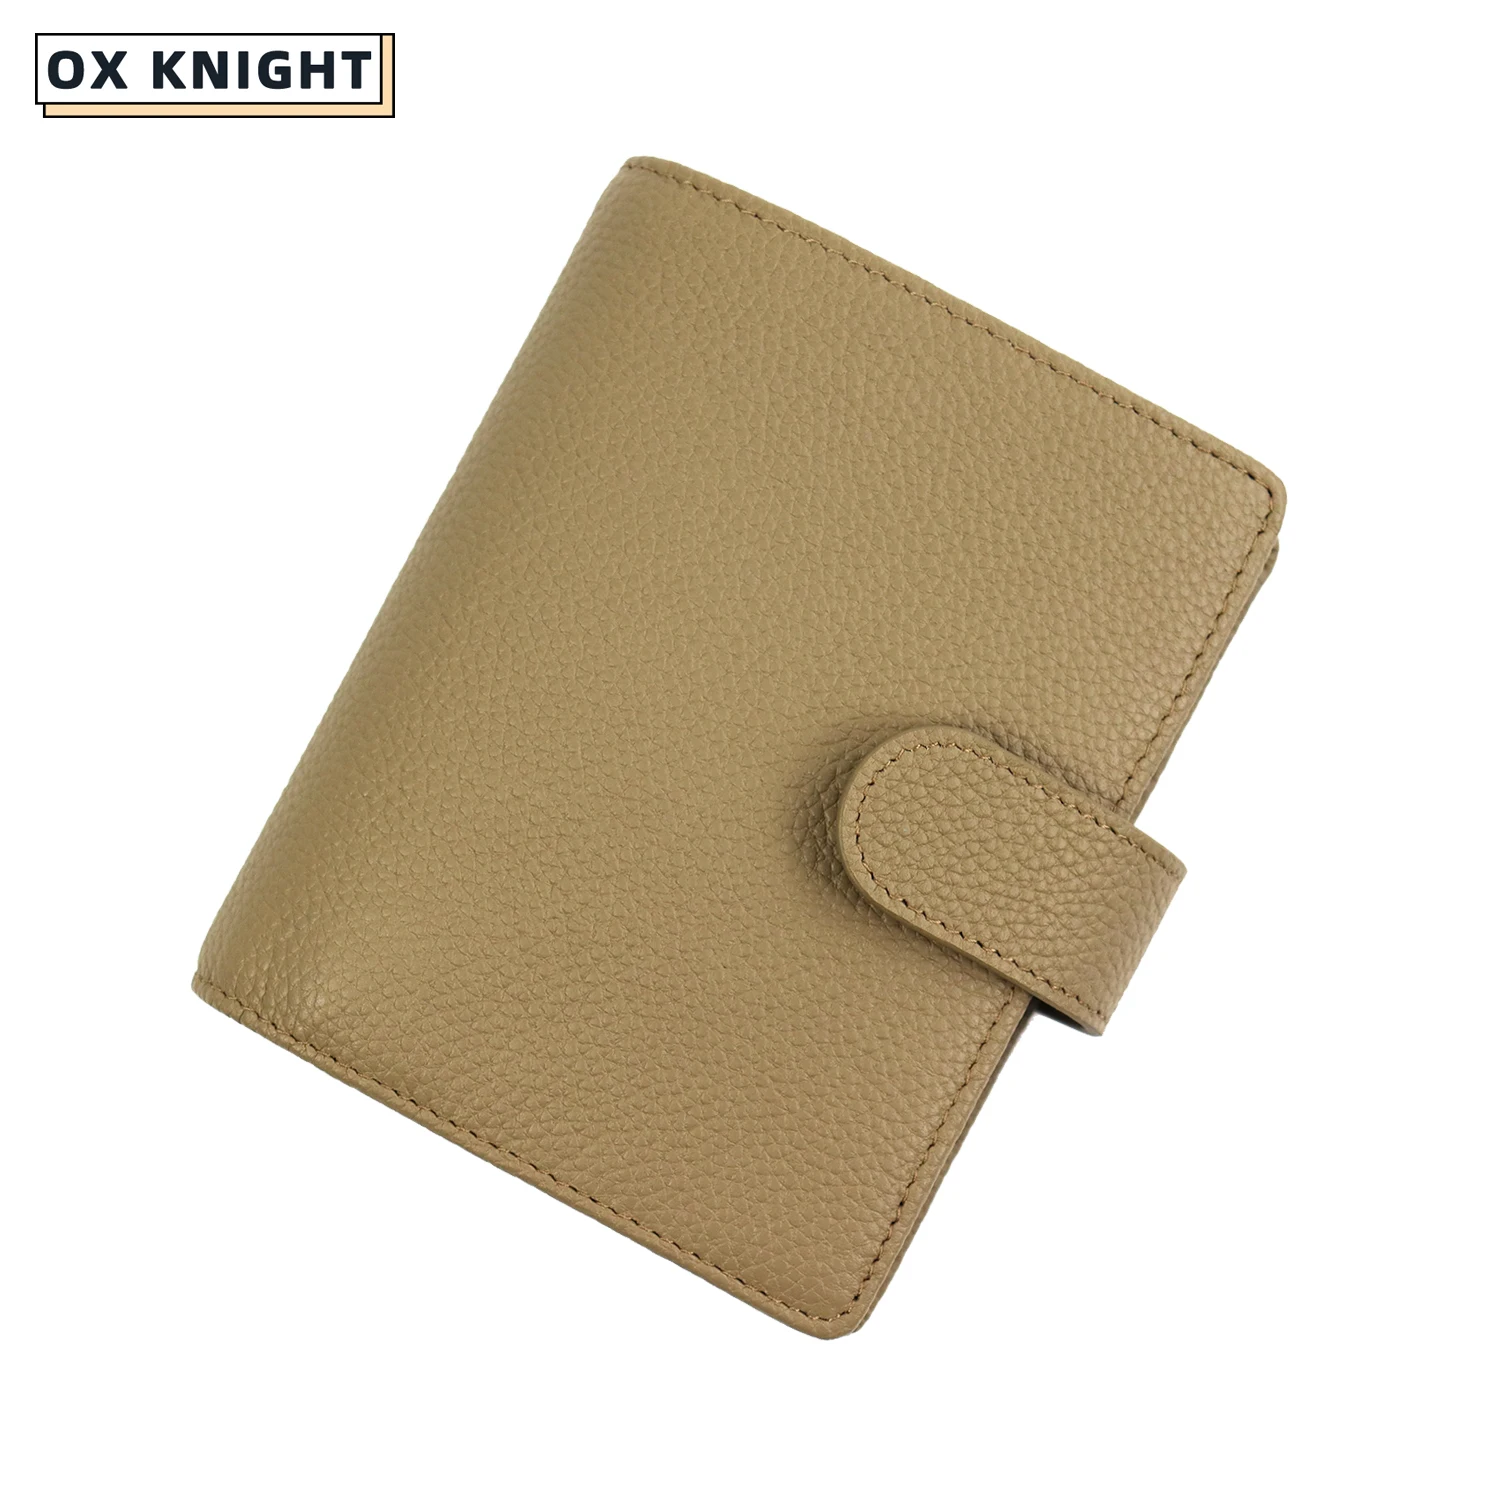 OX KNIGHT 100% Leather A8 Notebook Planner Book Cover Planner File Package Multifunctional Agenda Diary Journey Sketchbook